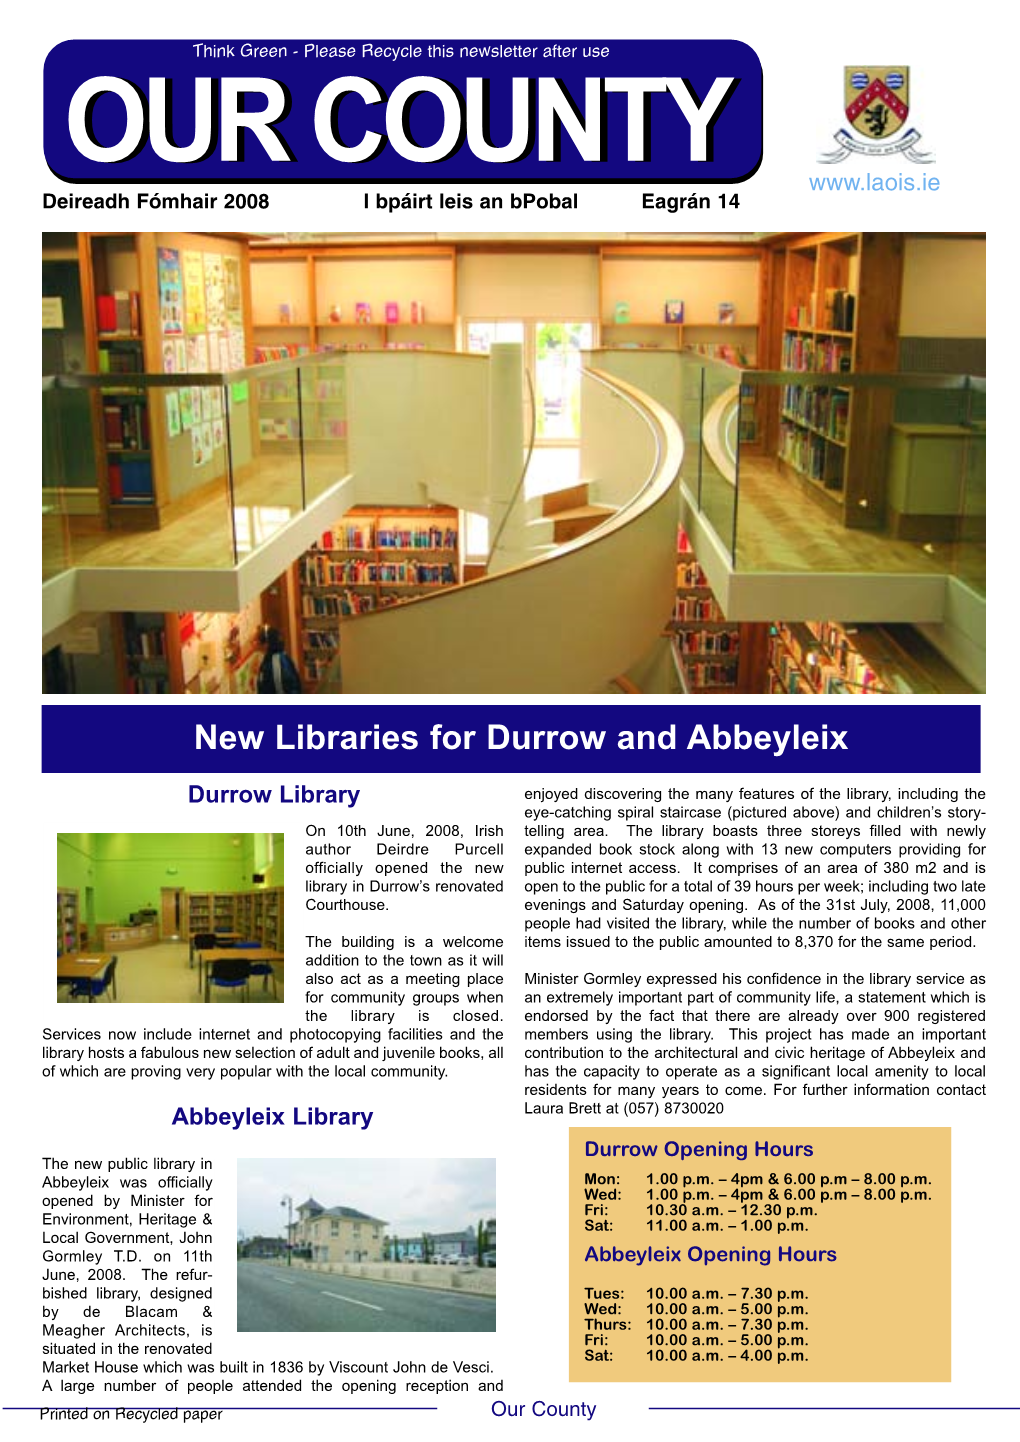 New Libraries for Durrow and Abbeyleix